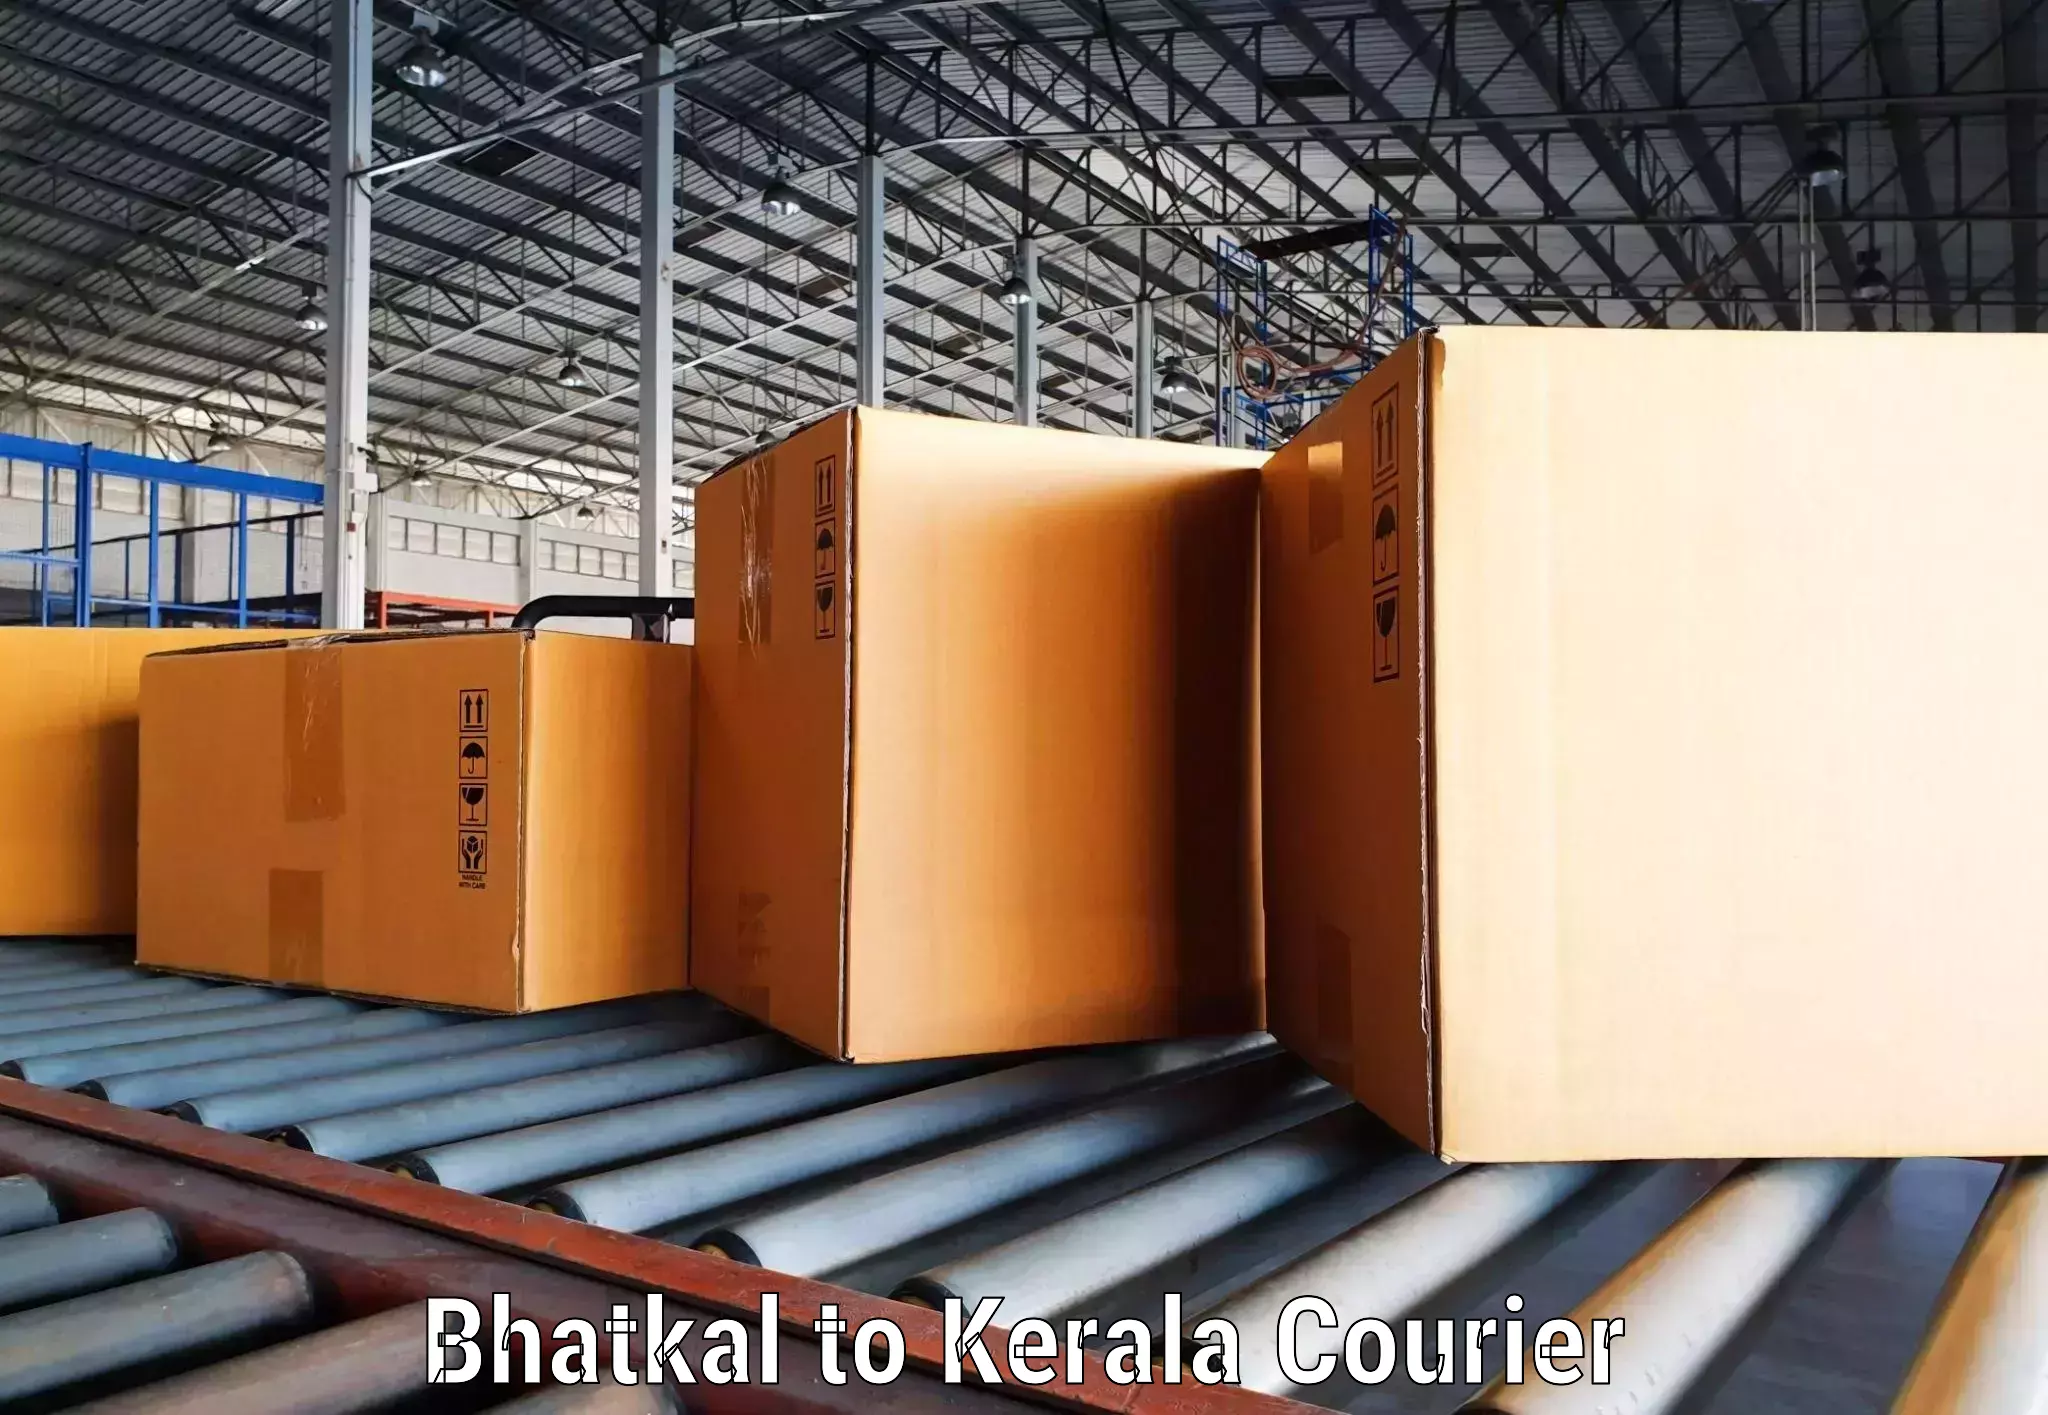 Custom courier packaging Bhatkal to Trivandrum